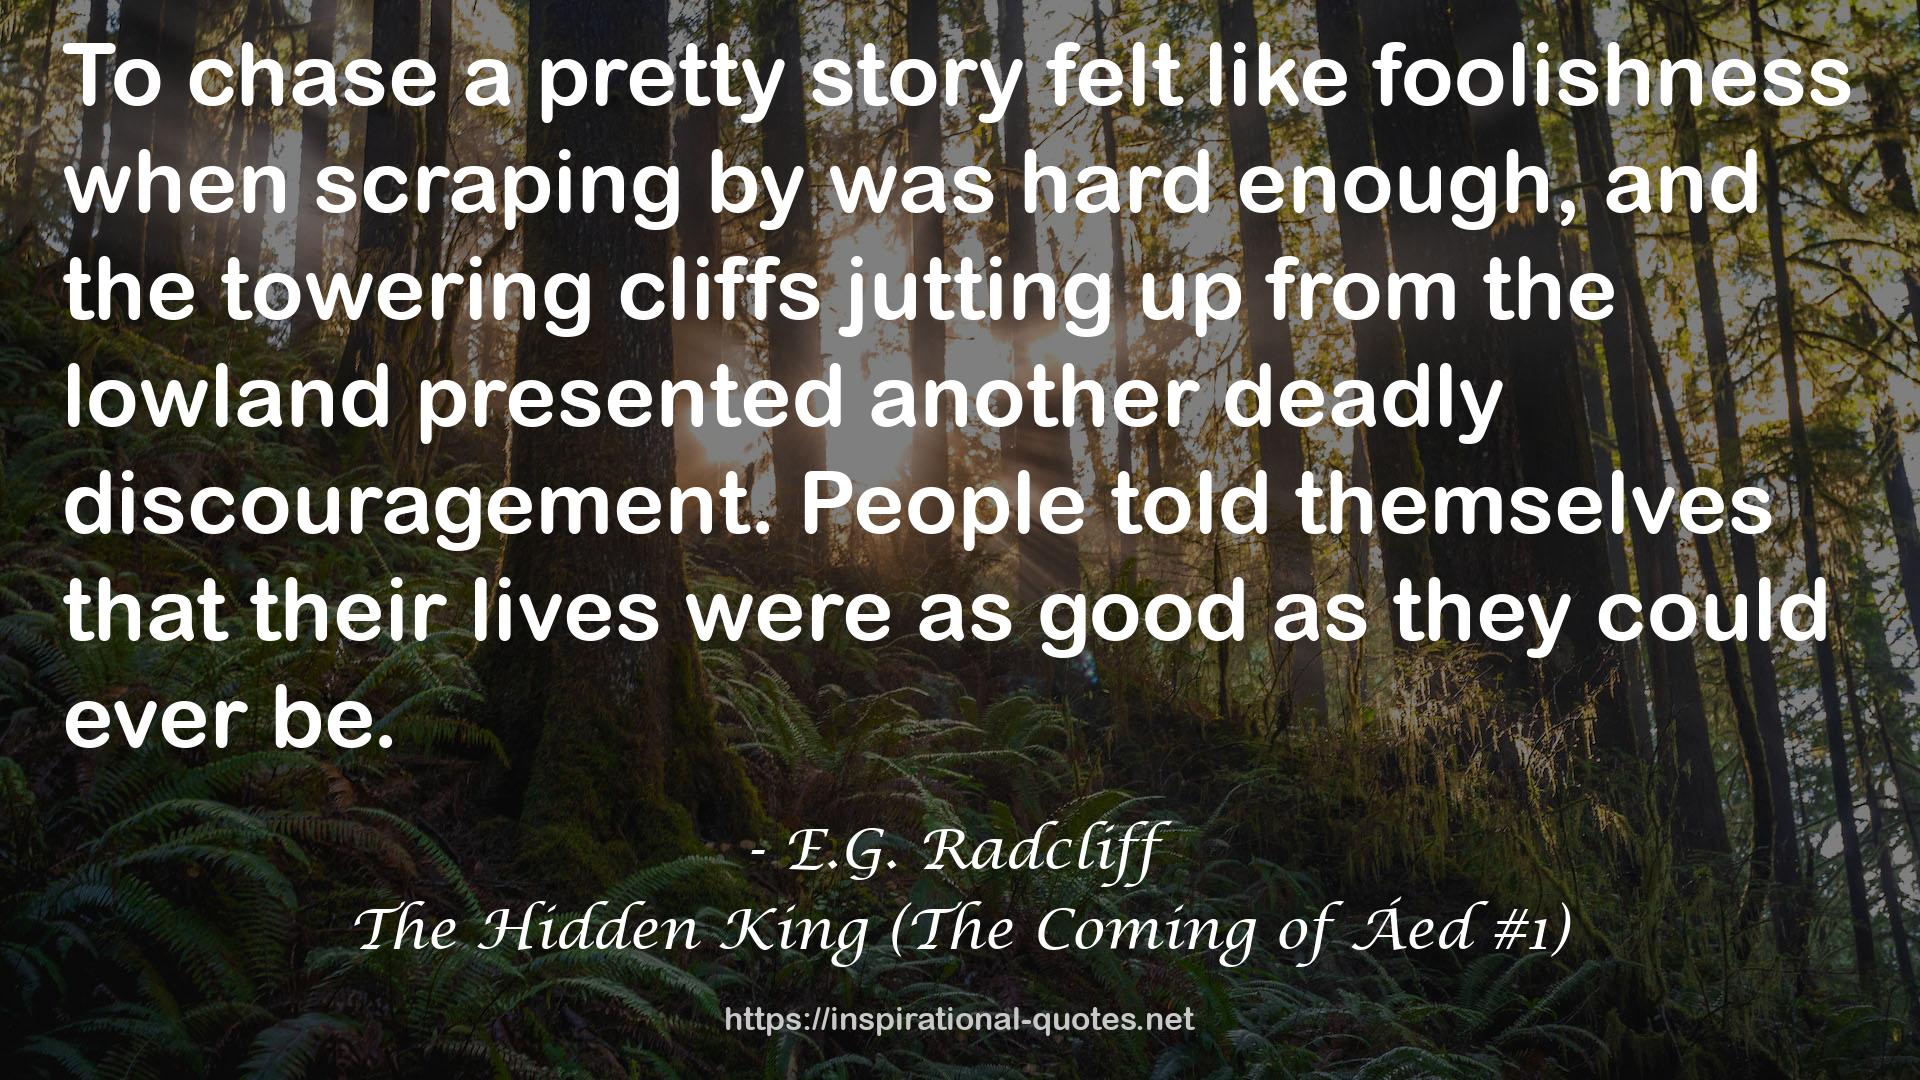 The Hidden King (The Coming of Áed #1) QUOTES